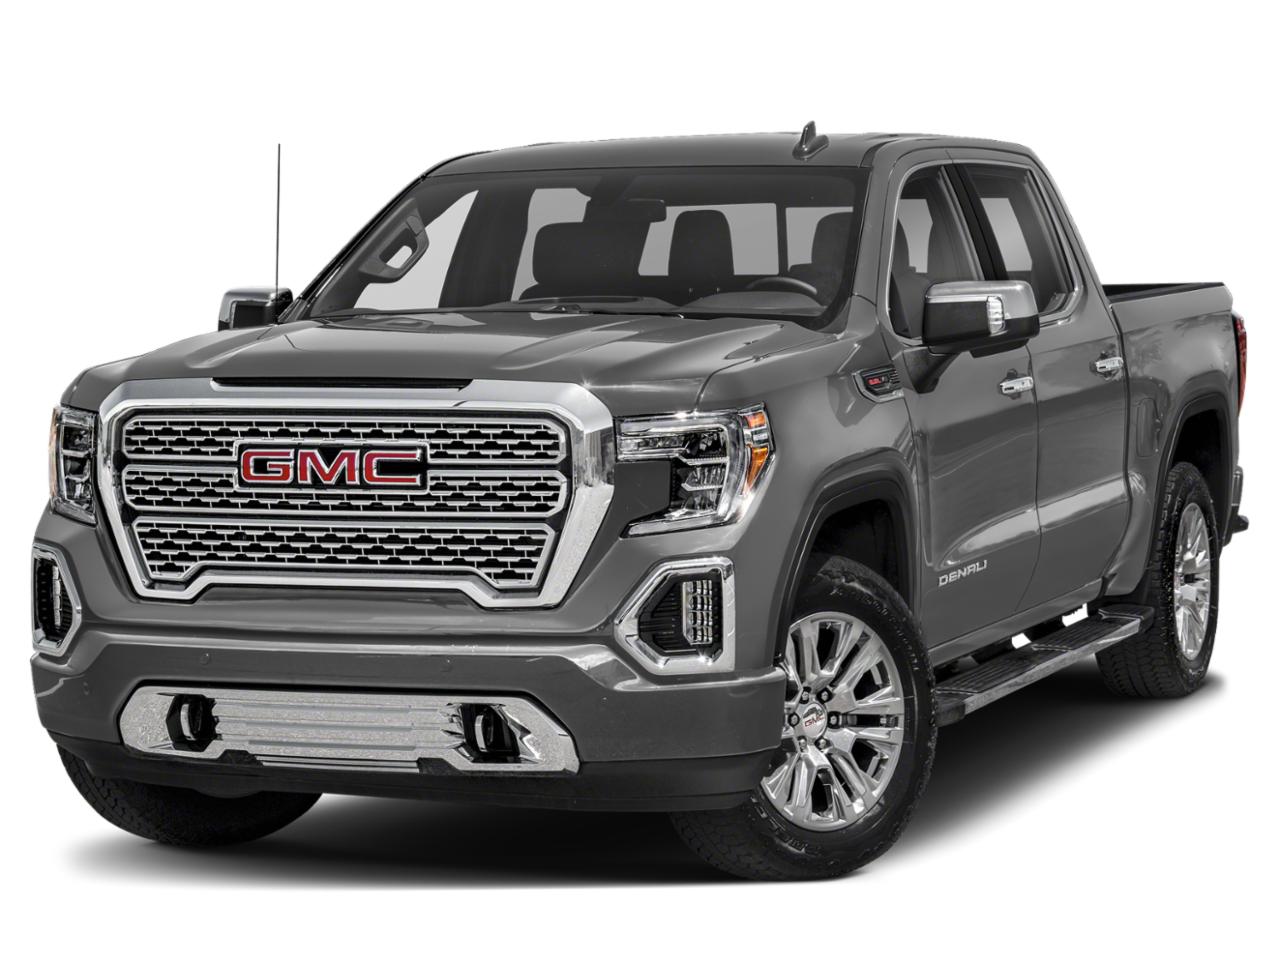 2019 Gray Gmc Sierra 1500 For Sale At James Wood Motors In Decatur Tx